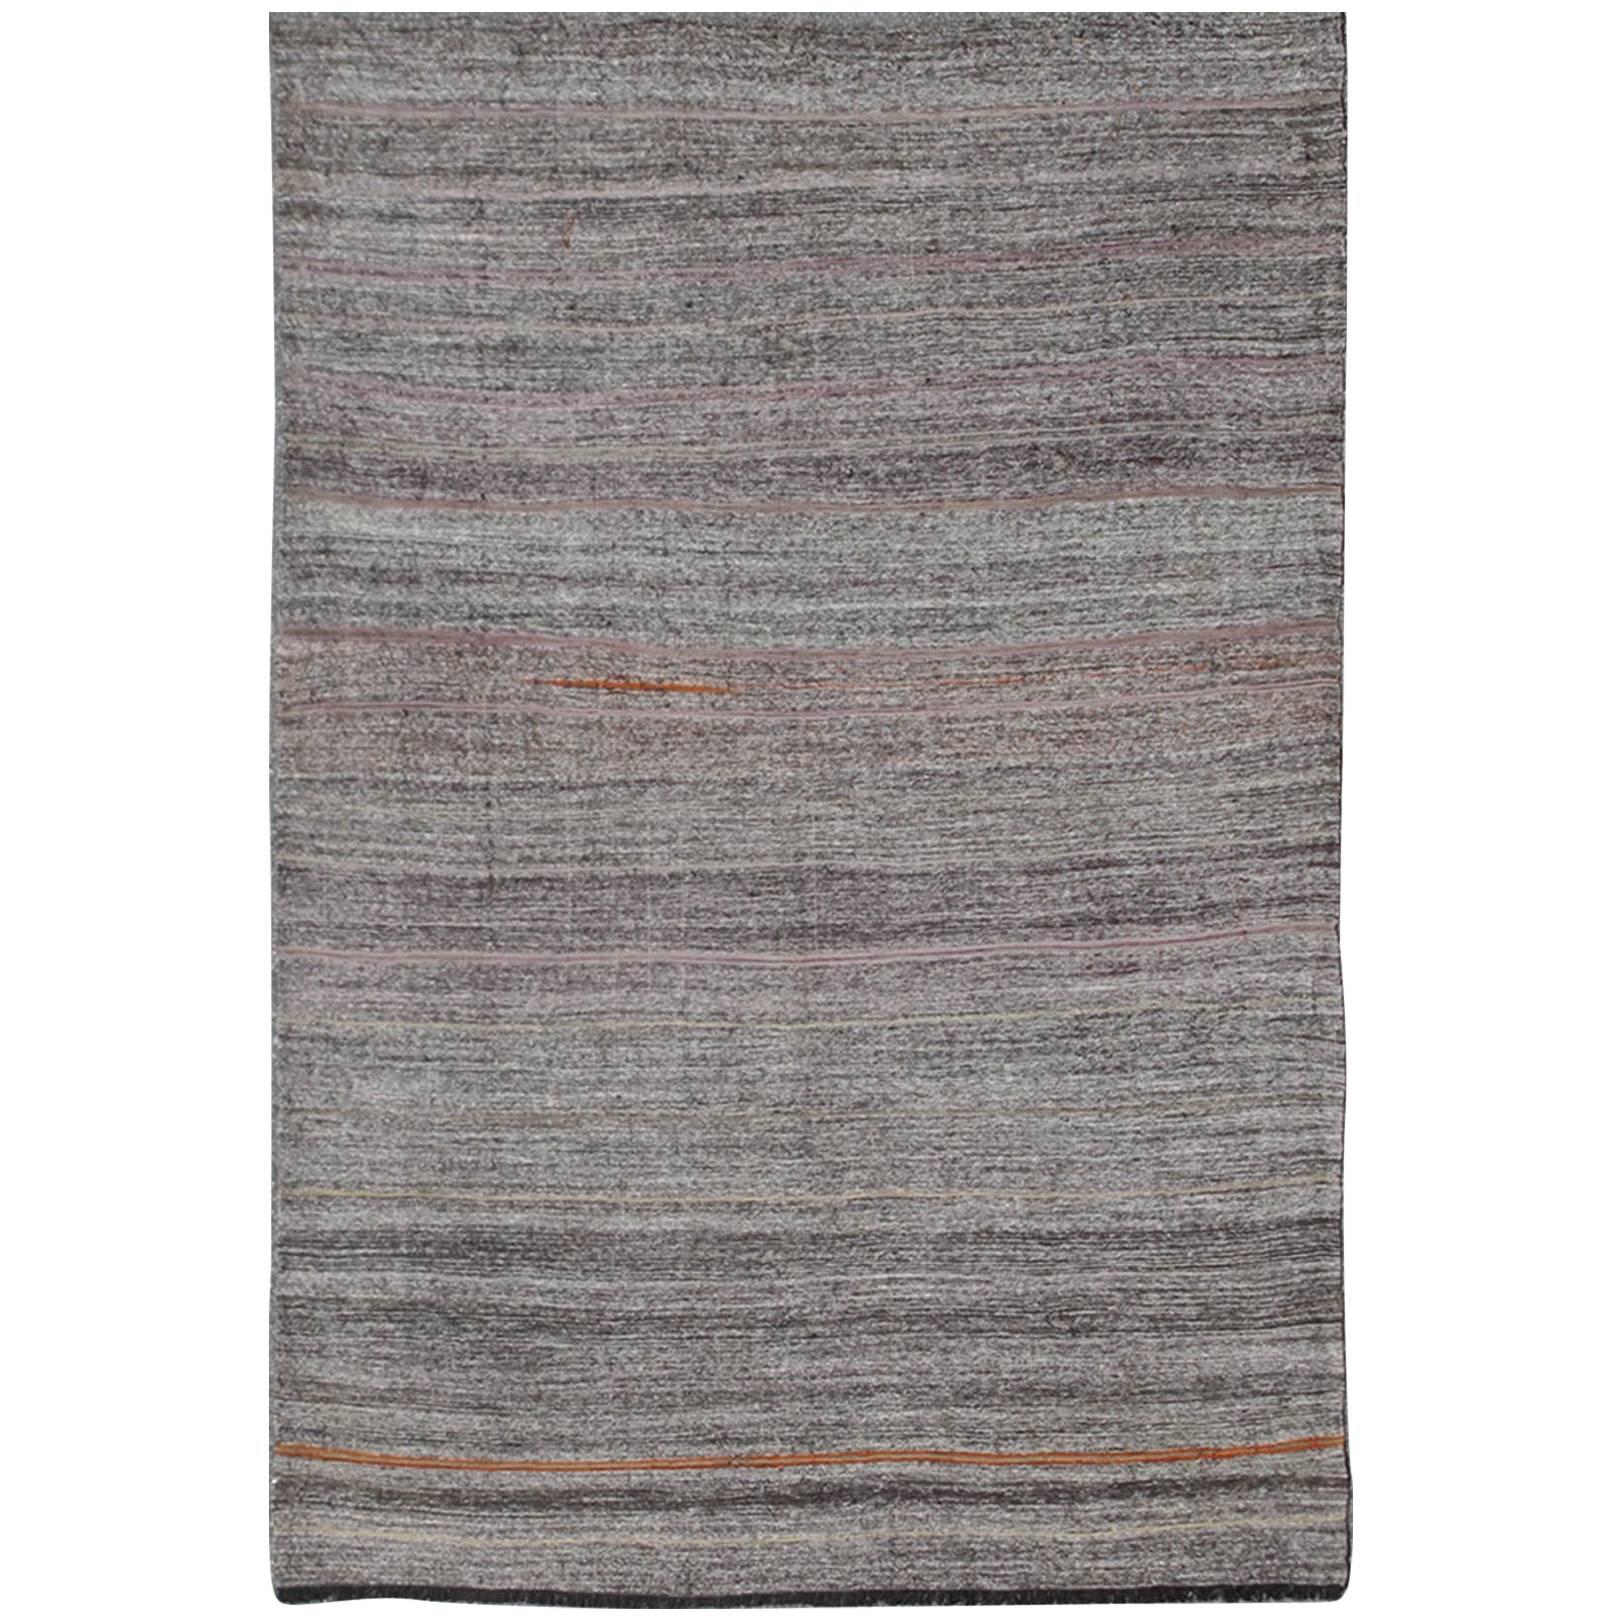 Vintage Turkish Kilim Rug with Variegated Stripes in Charcoal, Gray and Orange For Sale